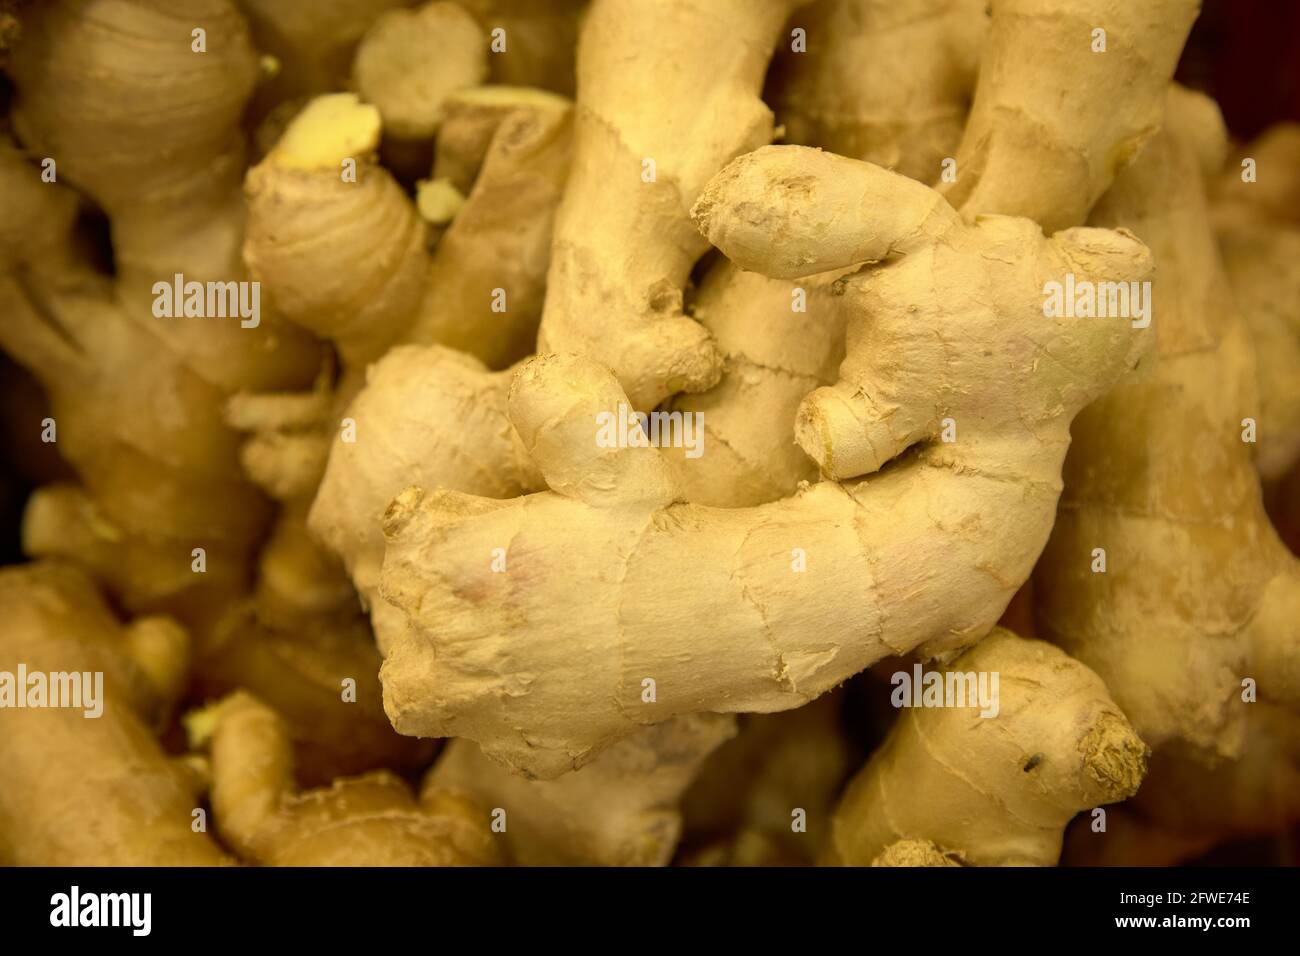 Fresh ginger on sale at a fresh produce market in Hong Kong, Stock Photo